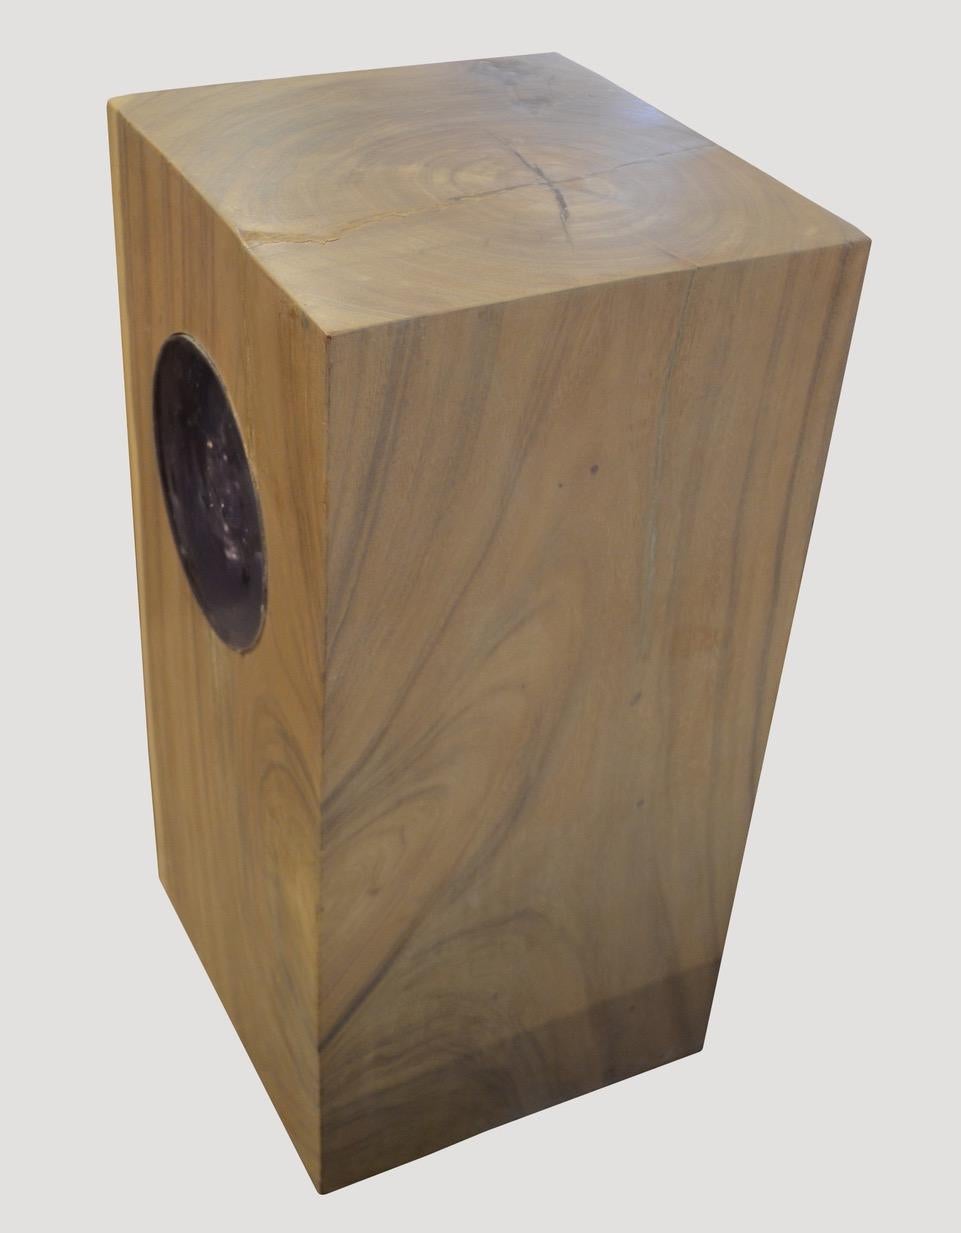 The St. Barts pedestal is made from suar wood stained white wash with a Minimalist circle filled with amethyst resin which resembles a unique quartz crystal. 

The St. Barts Collection features an exciting new line of organic white wash and